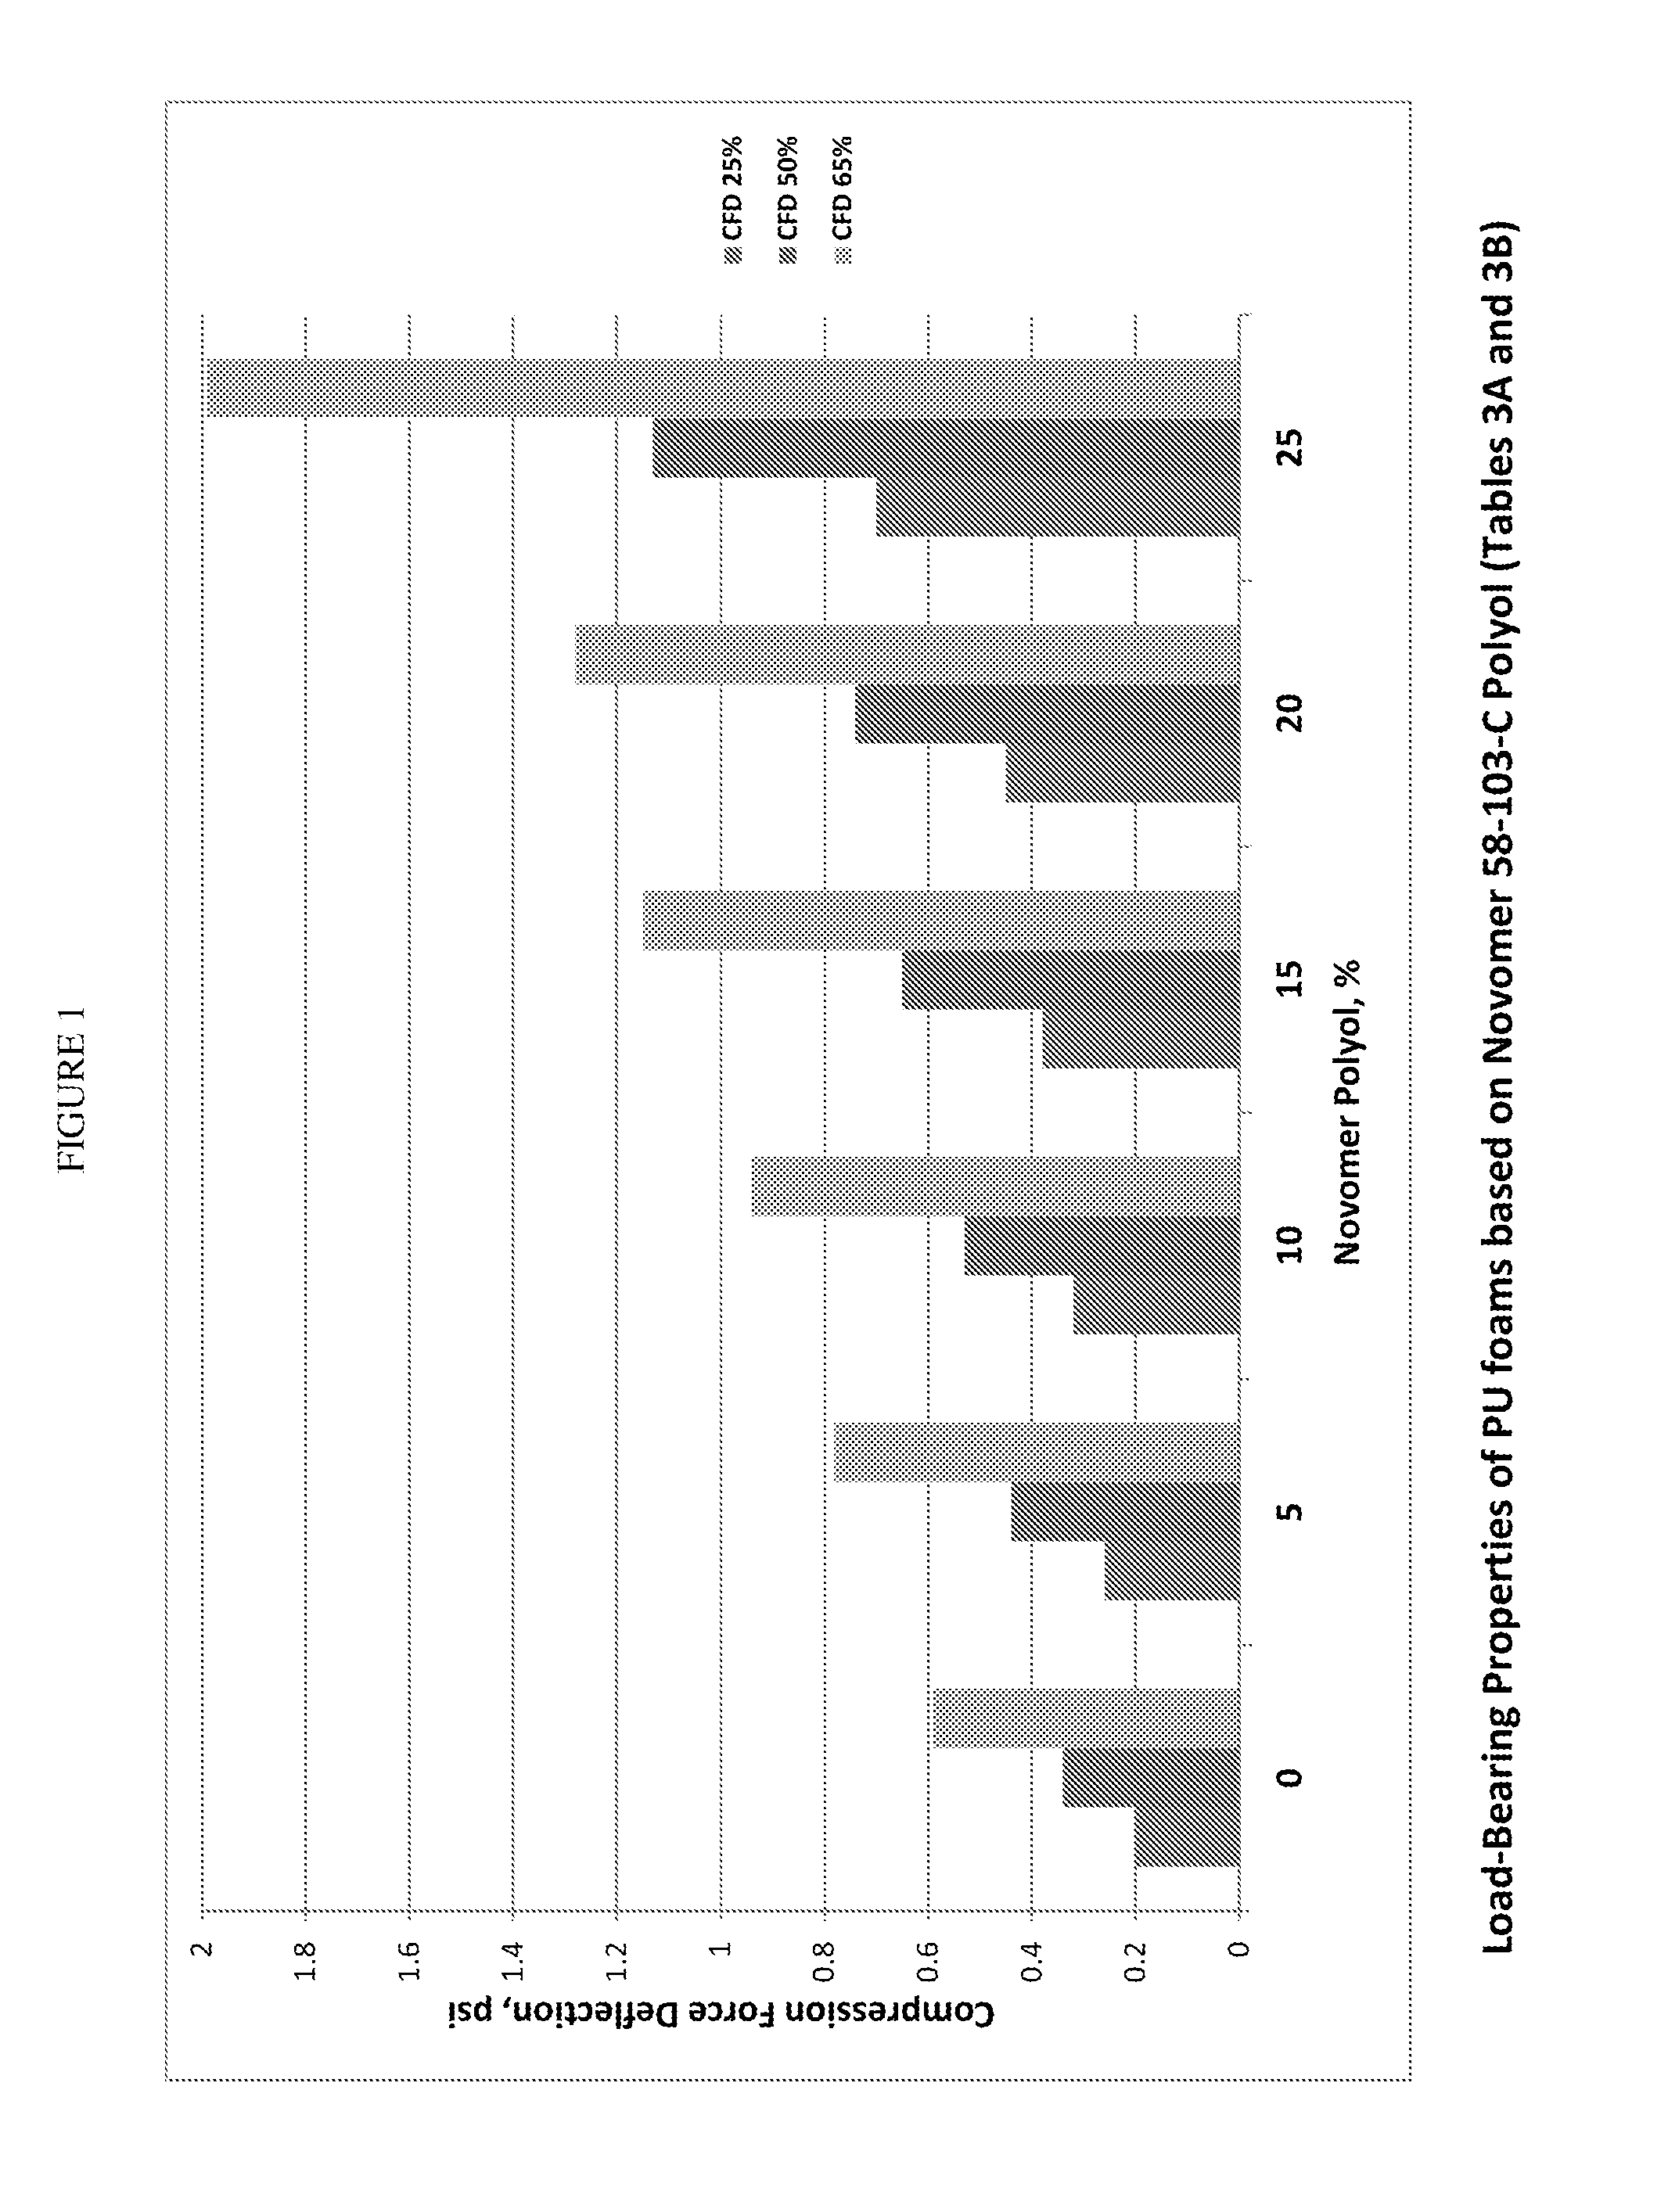 High strength polyurethane foam compositions and methods